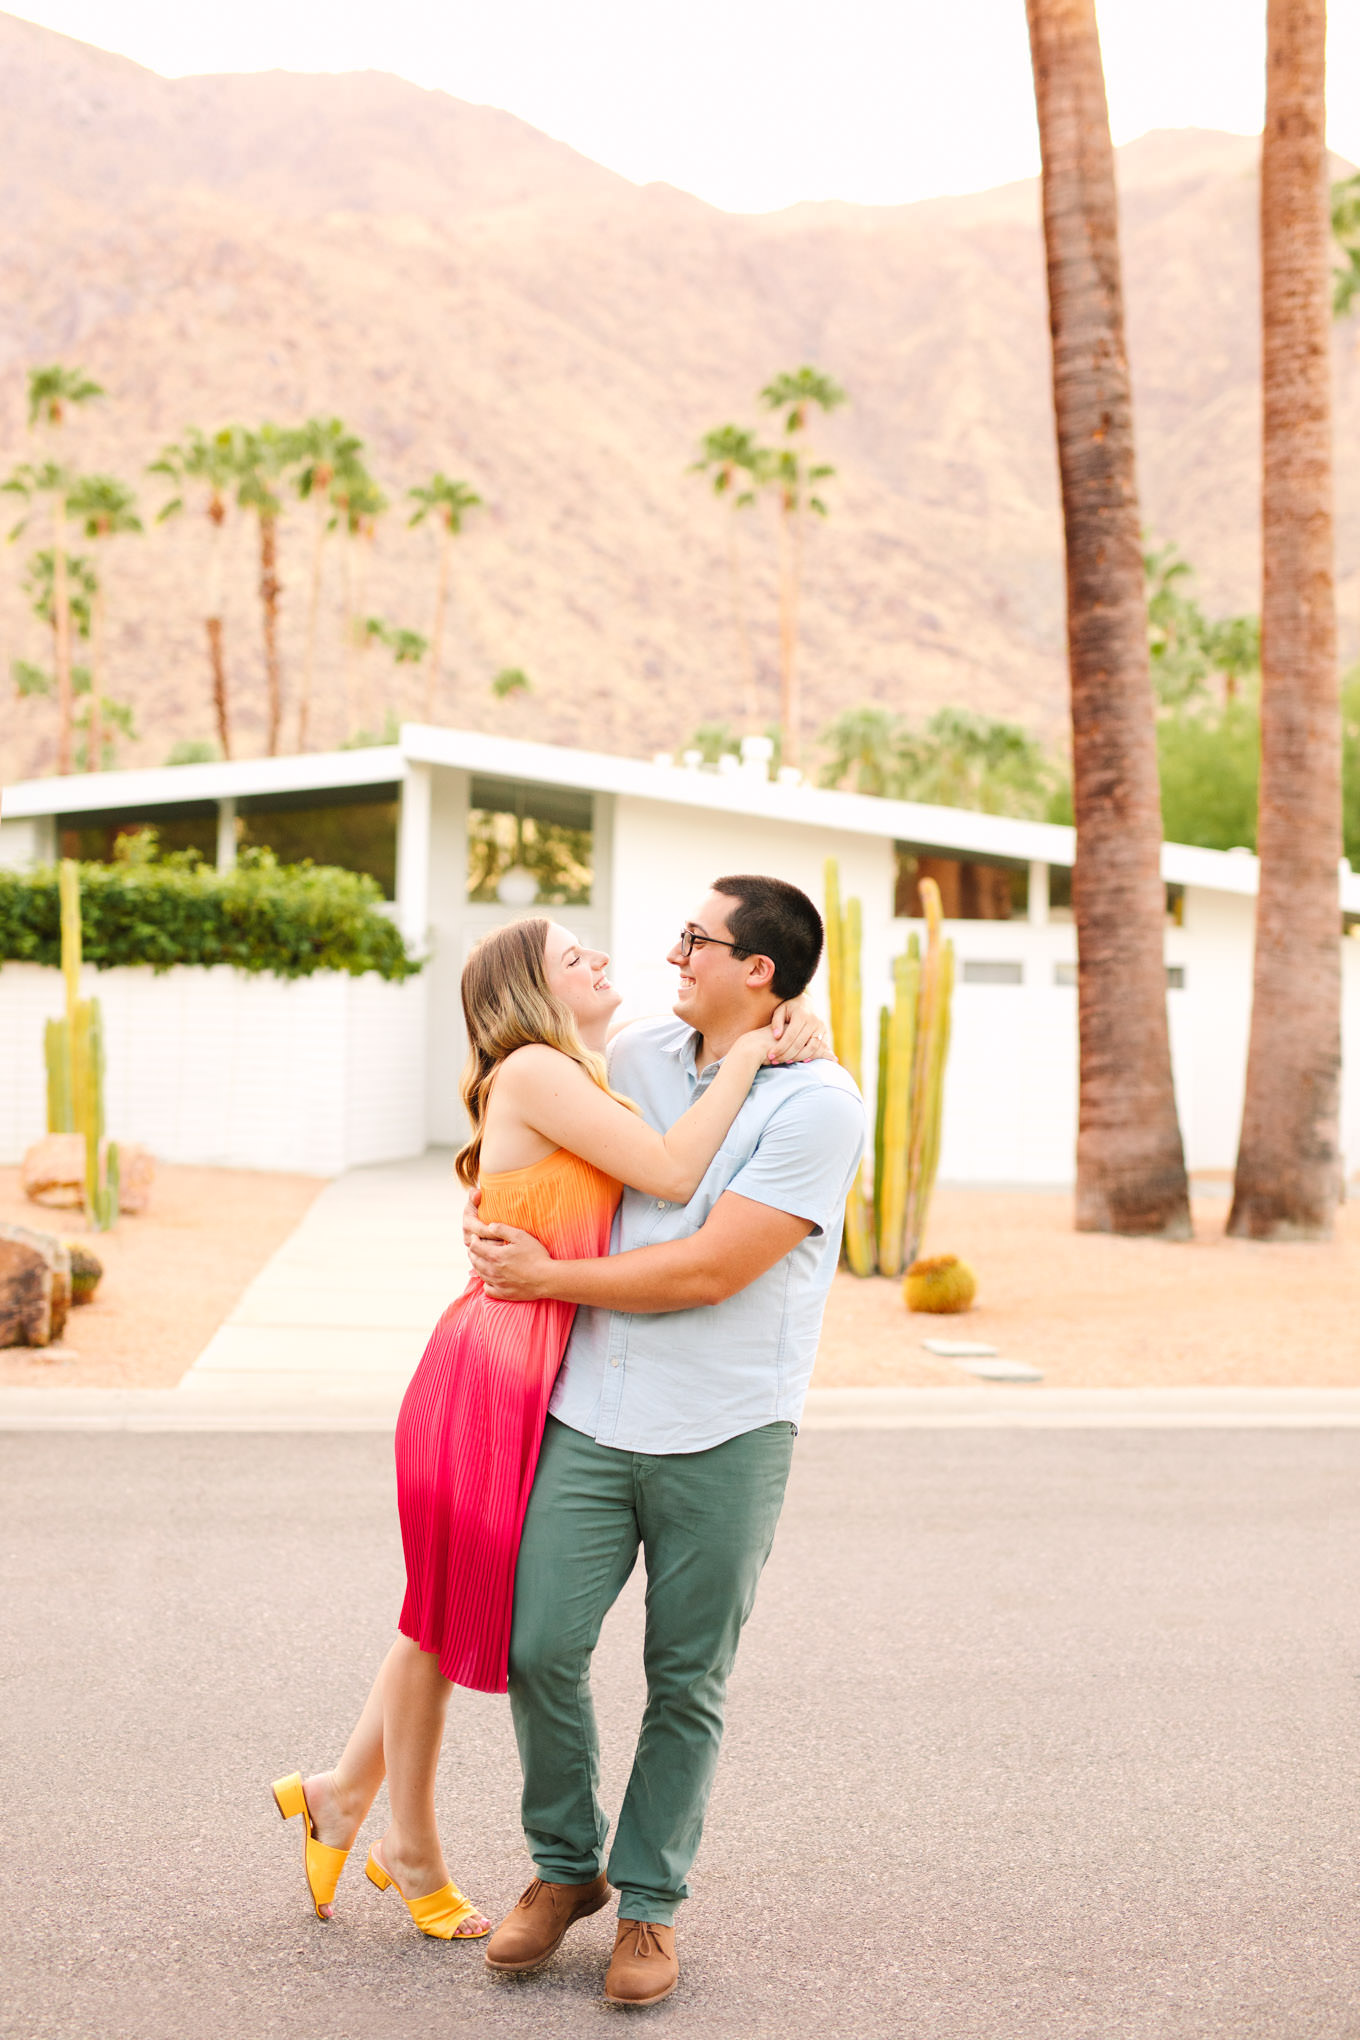 Palm Springs Mid-Century Modern house engagement session | Engagement, elopement, and wedding photography roundup of Mary Costa’s favorite images from 2020 | Colorful and elevated photography for fun-loving couples in Southern California | #2020wedding #elopement #weddingphoto #weddingphotography #microwedding   Source: Mary Costa Photography | Los Angeles